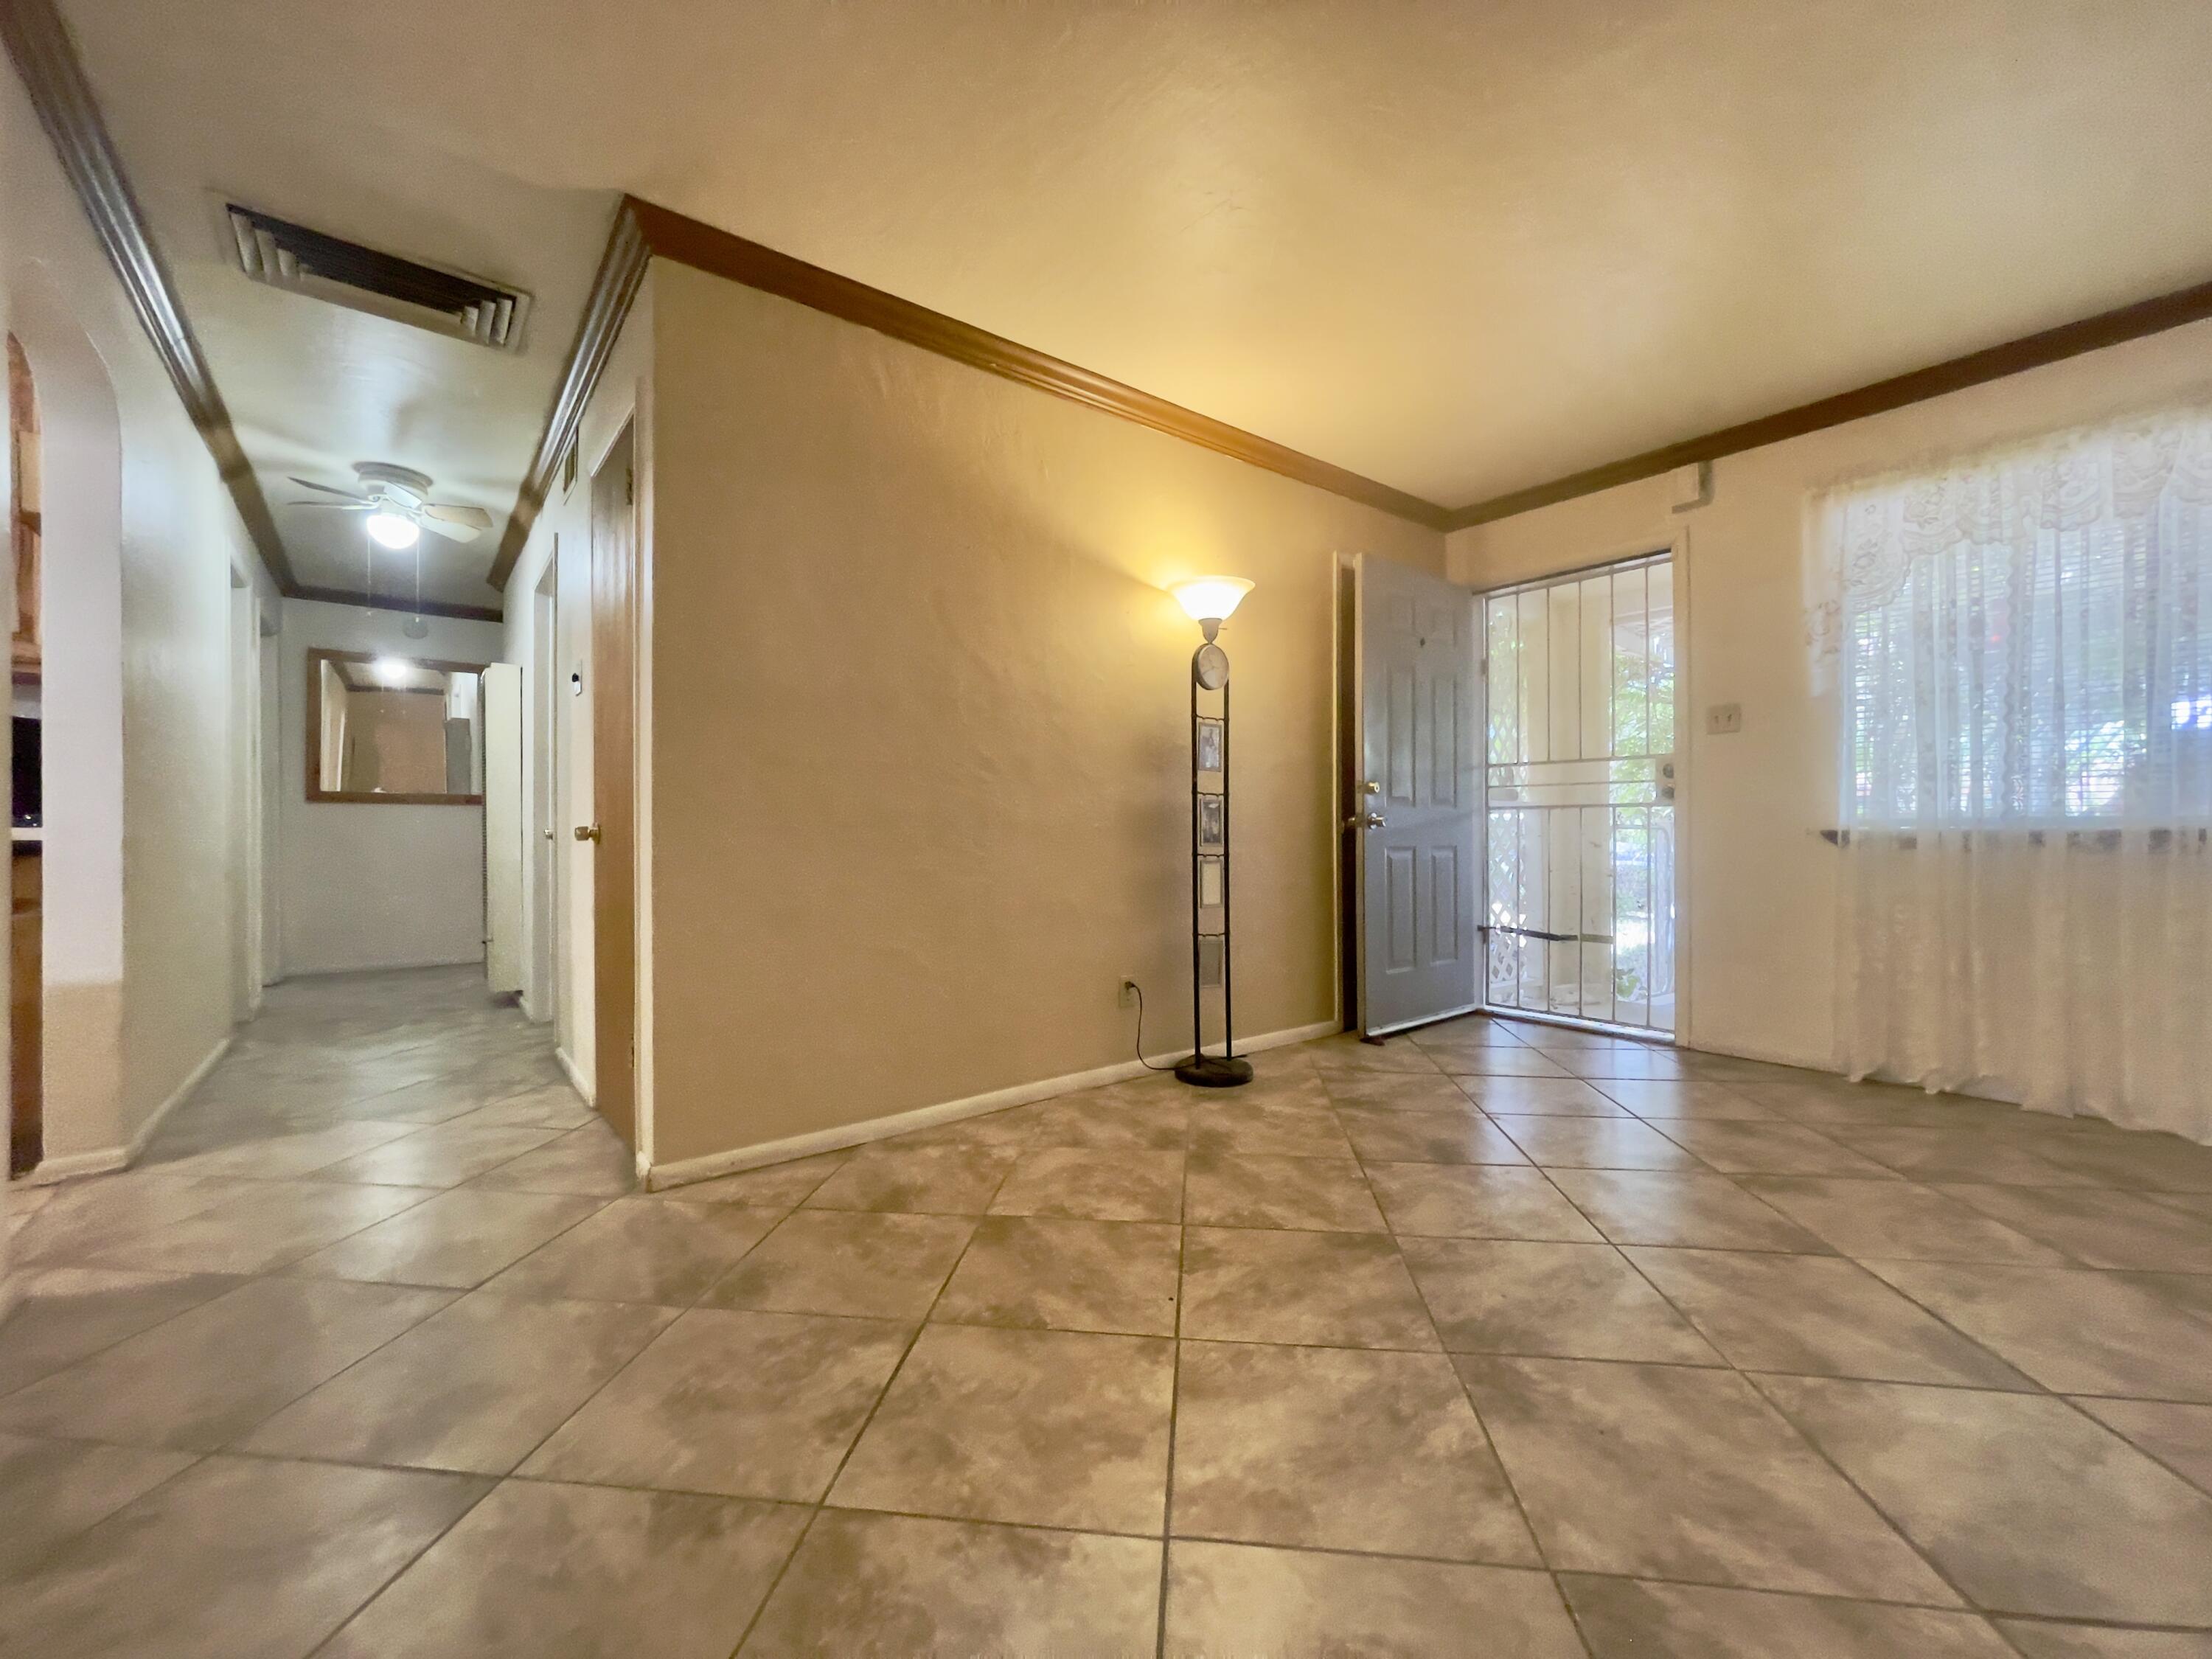 343 62nd Street NW, Albuquerque, New Mexico 87105, 3 Bedrooms Bedrooms, ,2 BathroomsBathrooms,Residential,For Sale,343 62nd Street NW,1062068